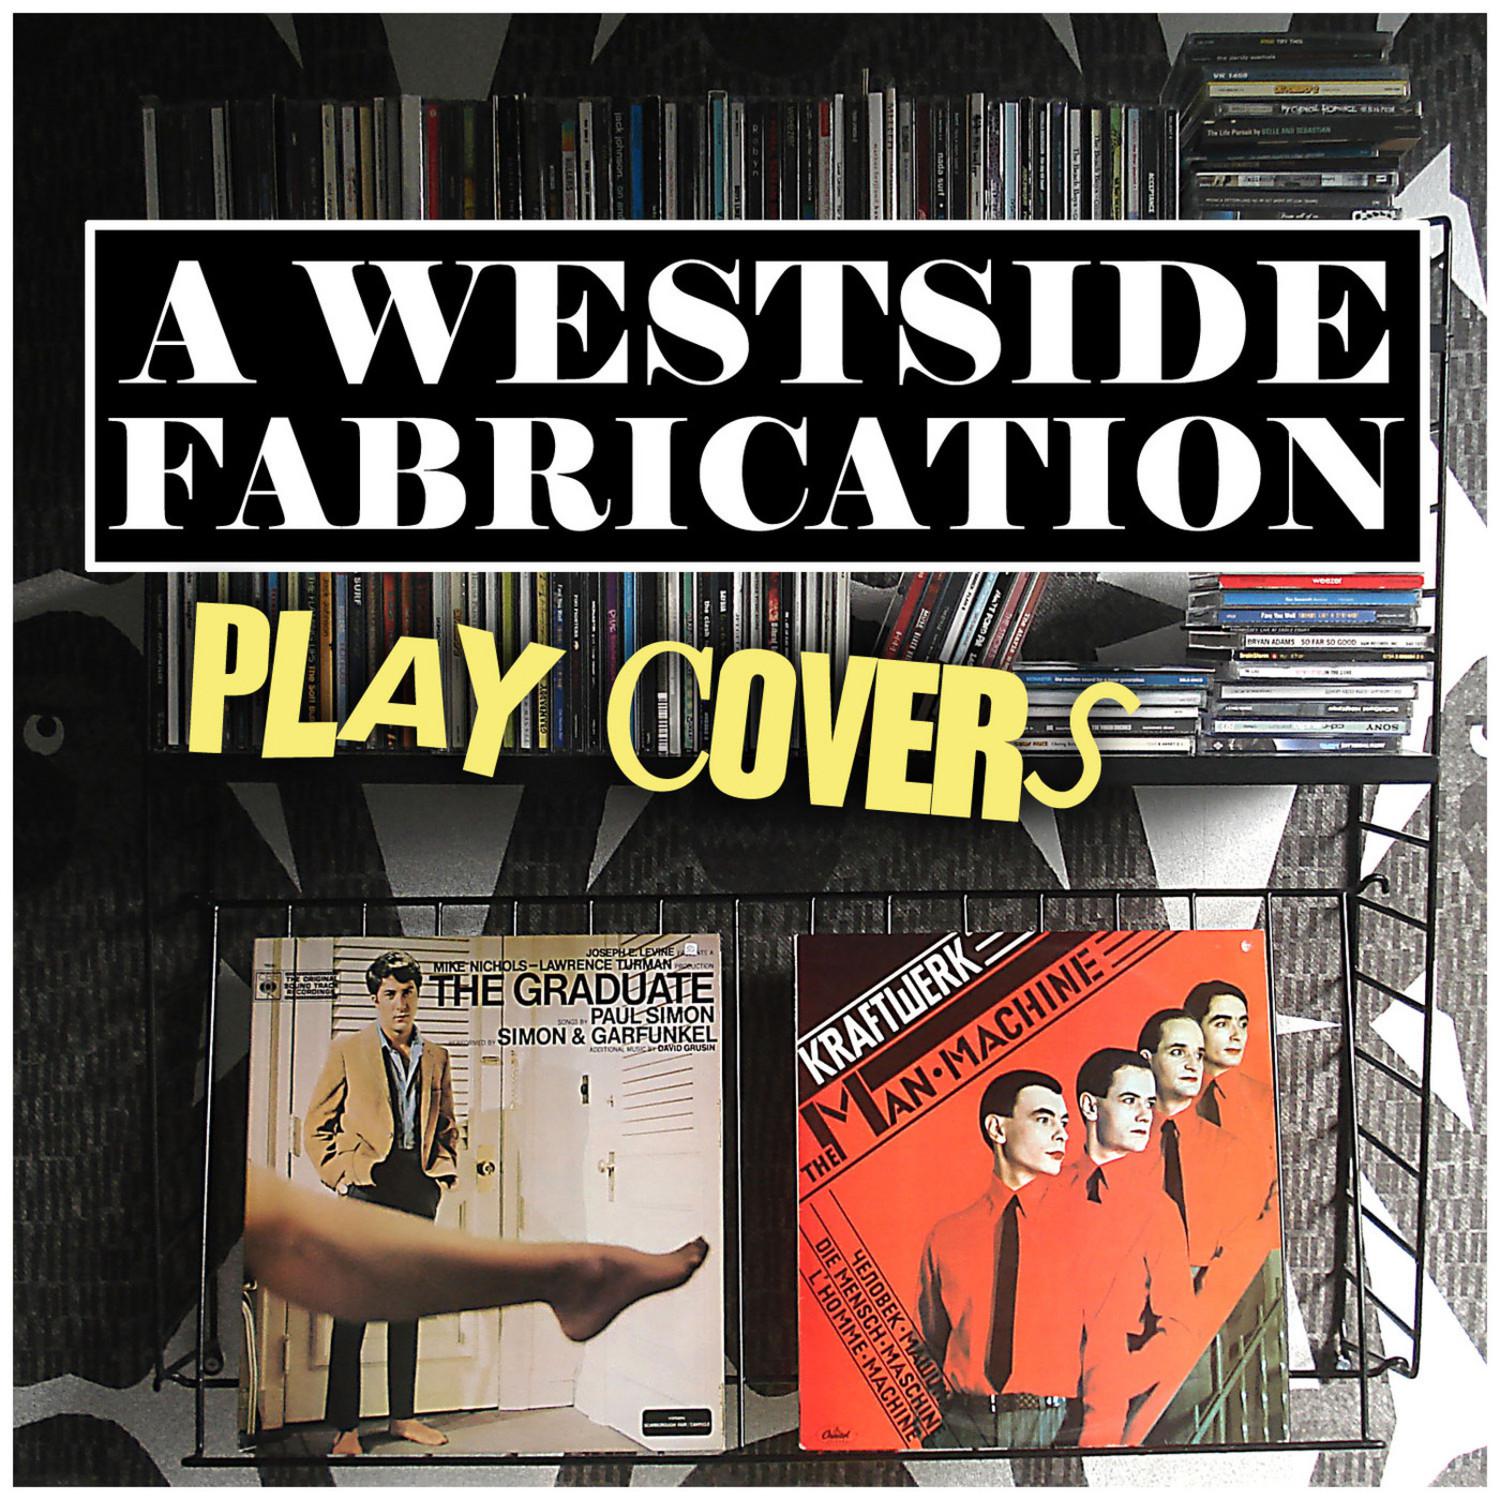 A West Side Fabrication Play Covers